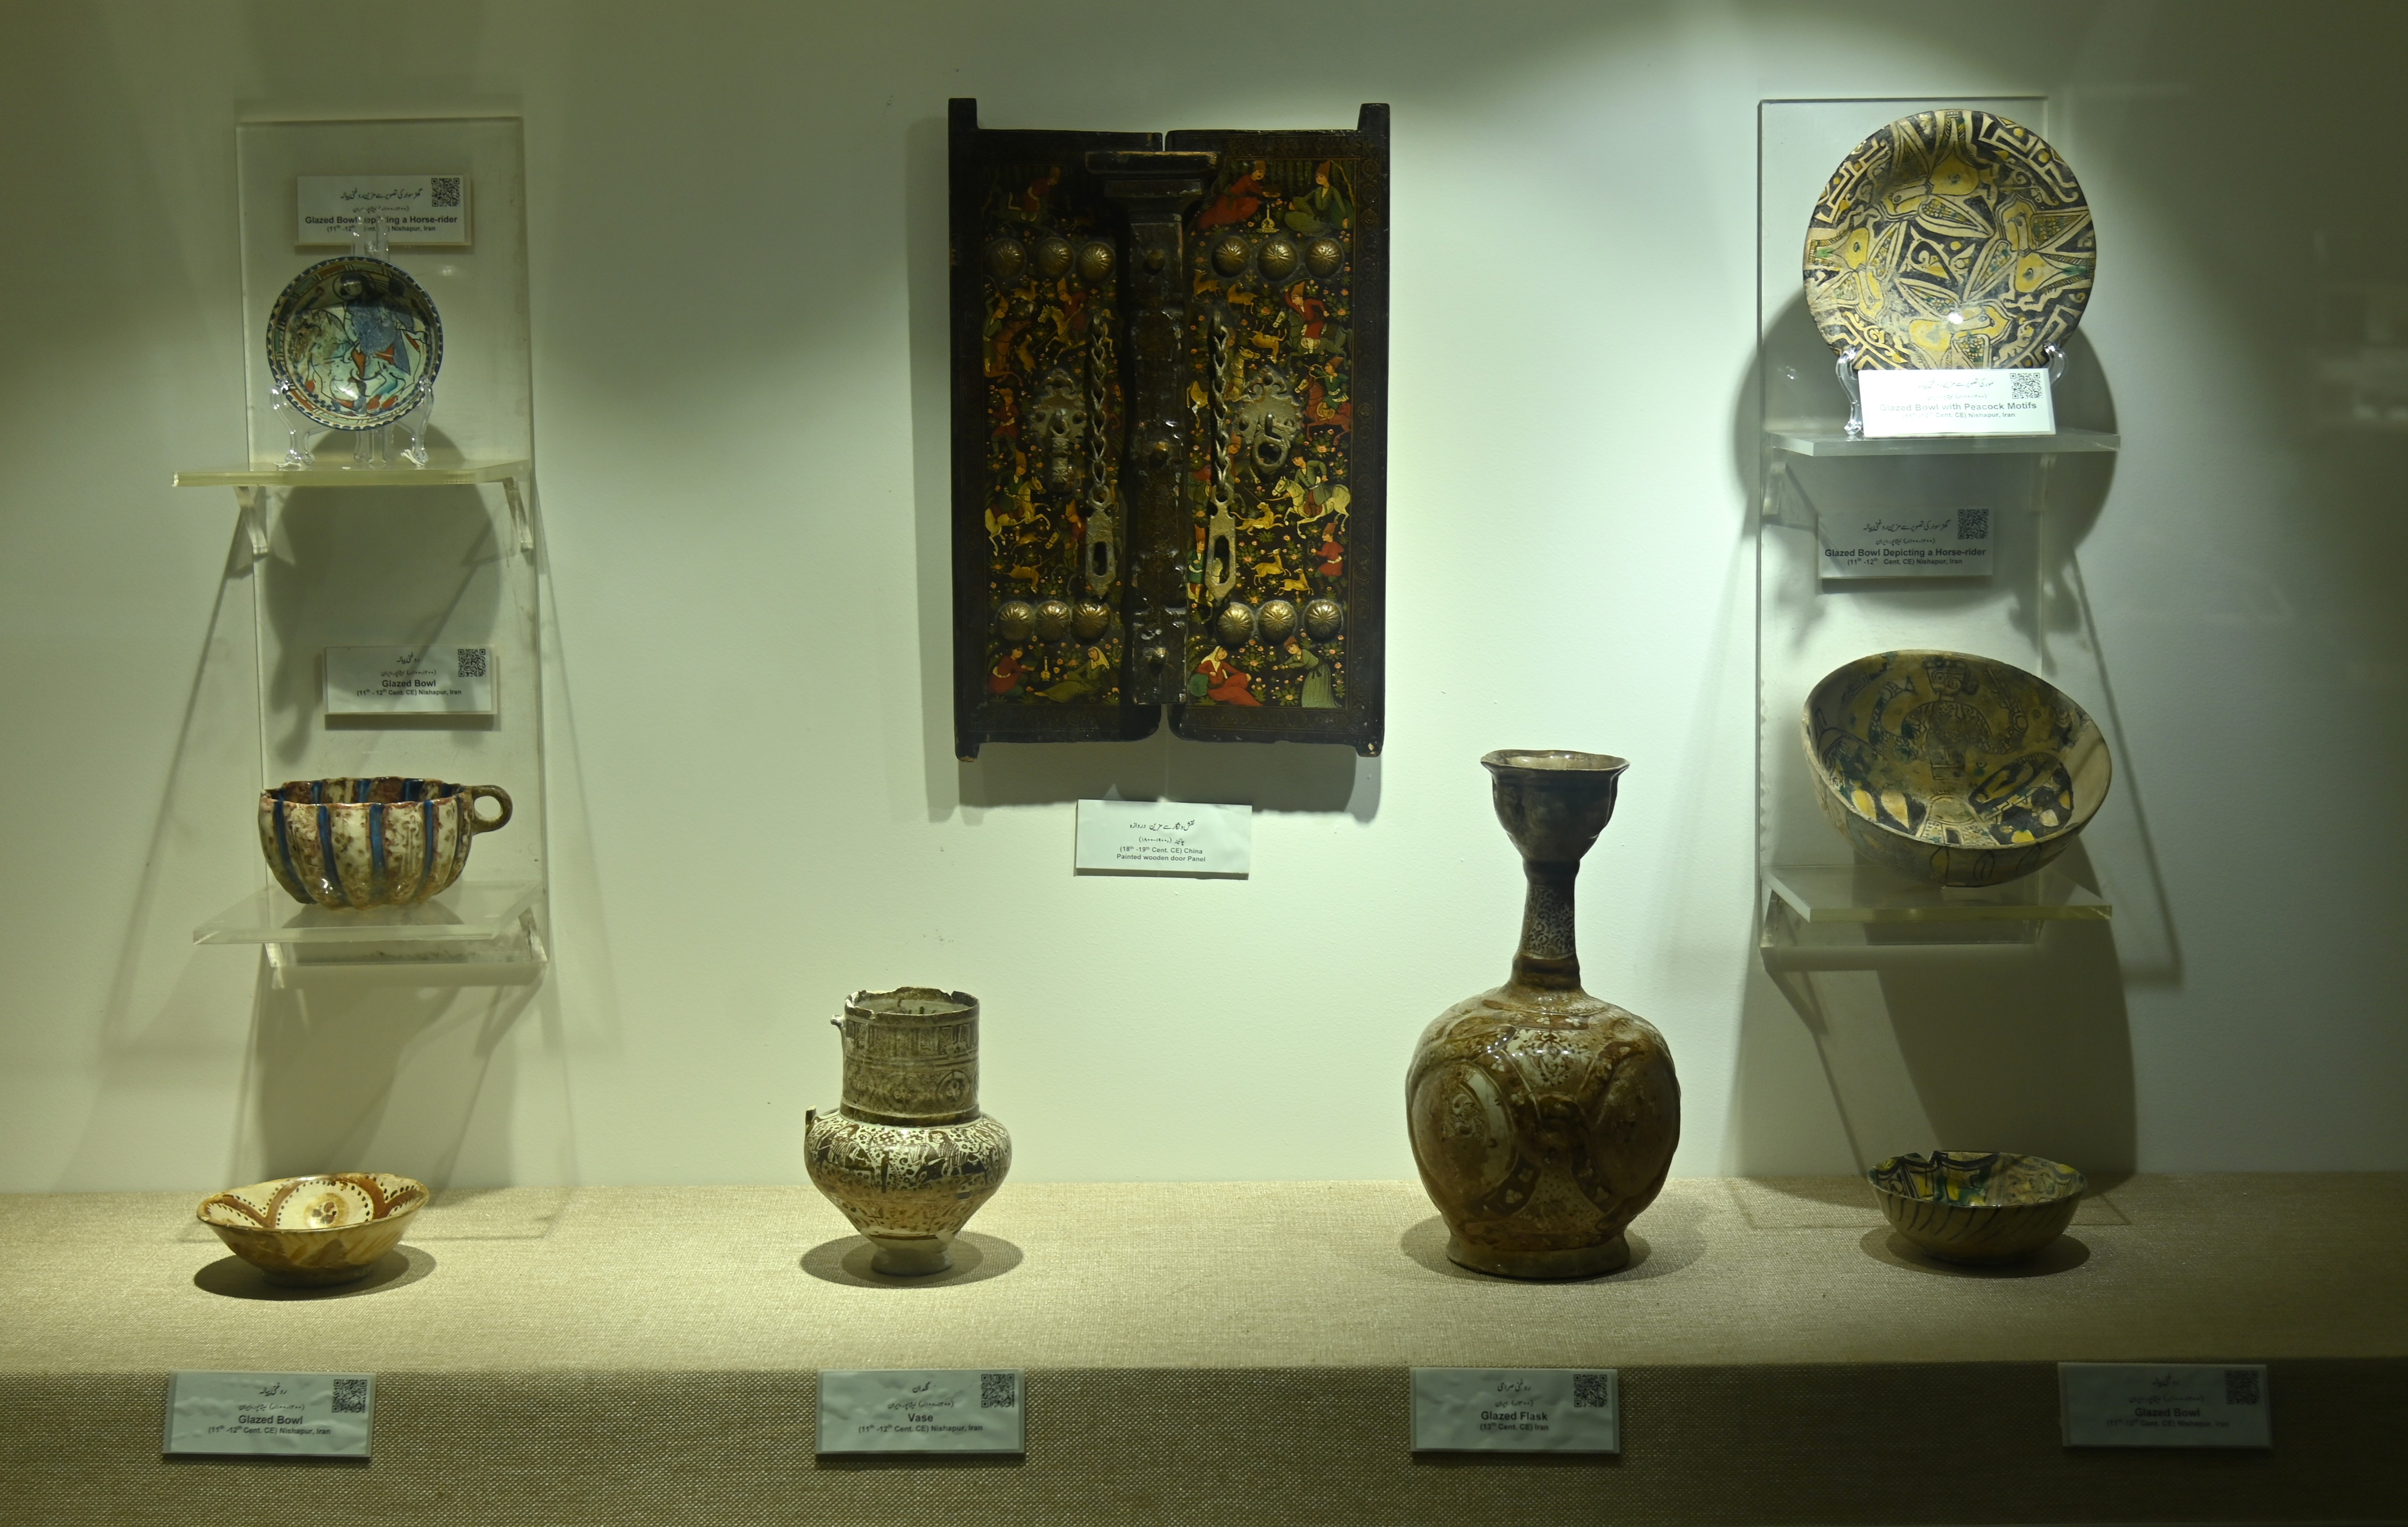 The Home Decor Antiques displayed at the Sir Syed Memorial Museum